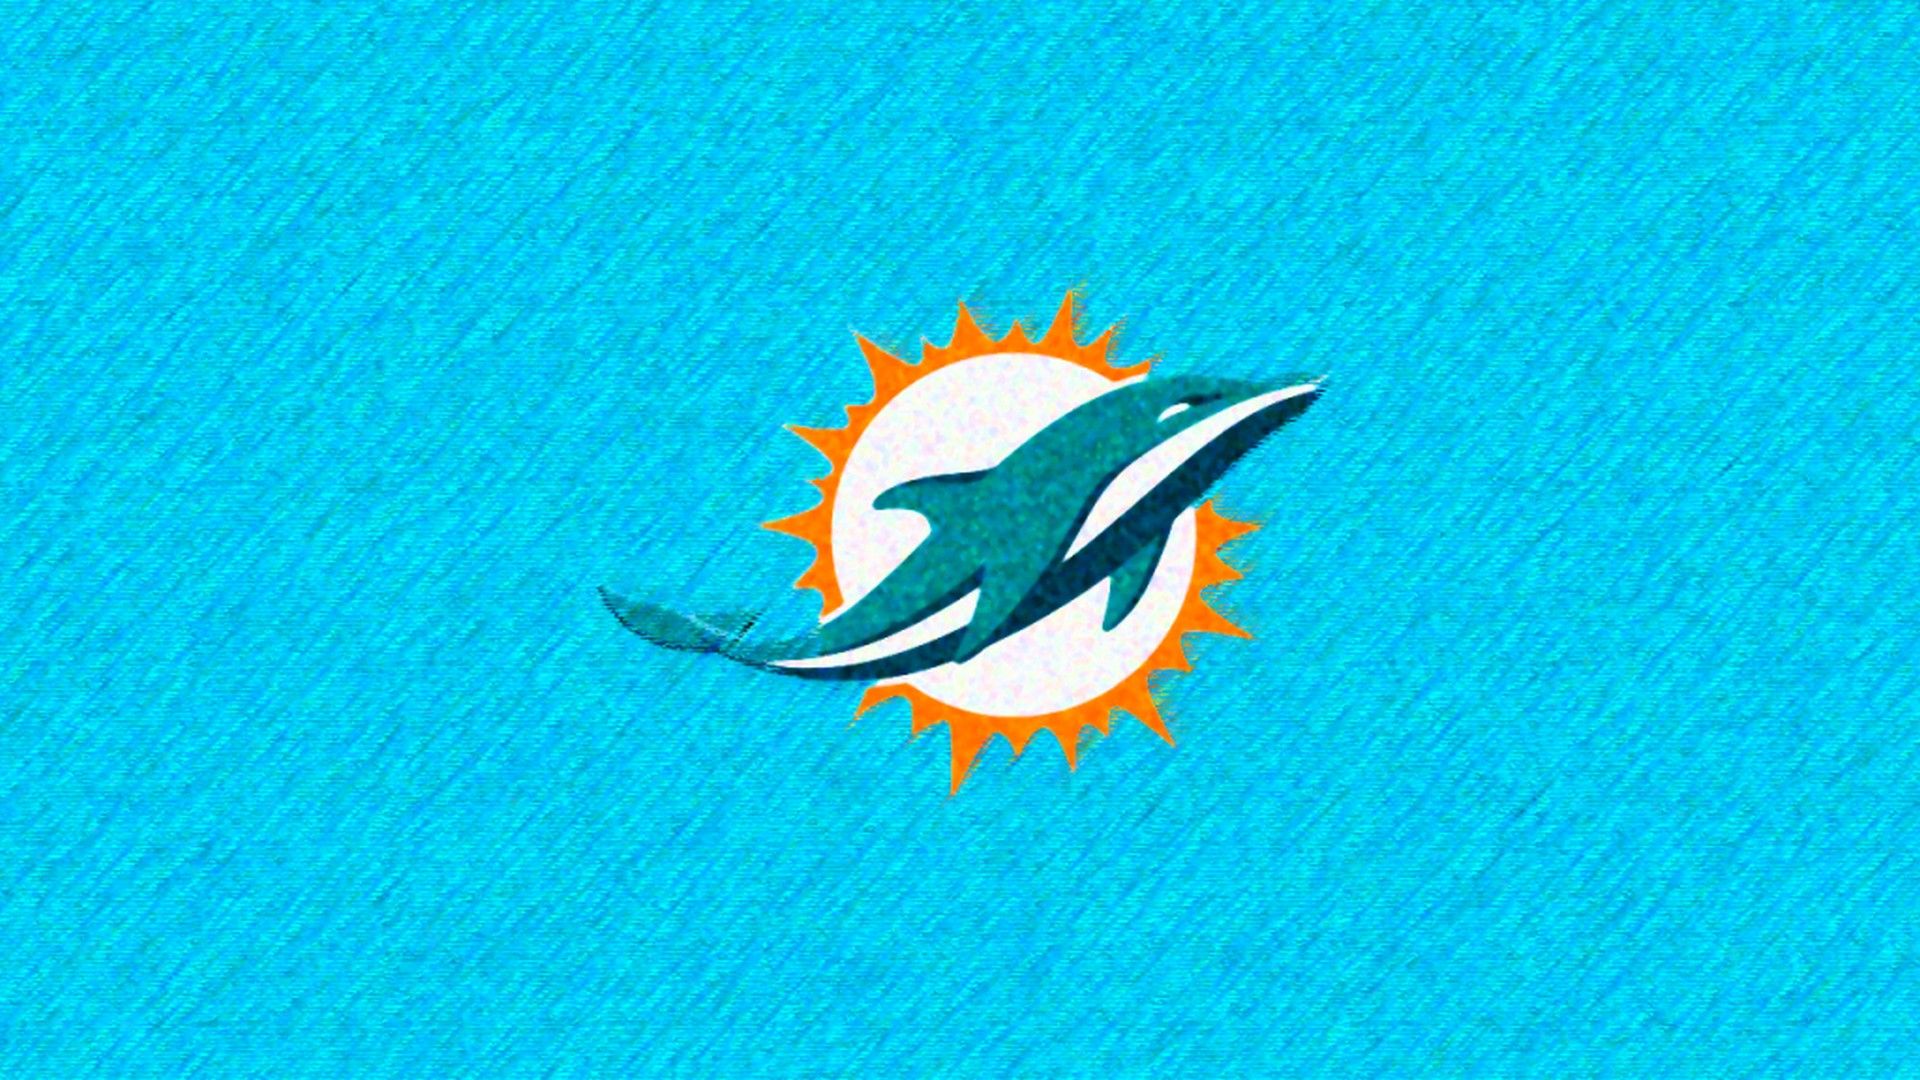 HD Miami Dolphins Background NFL Football Wallpaper. Football wallpaper, Nfl football wallpaper, Best wallpaper hd